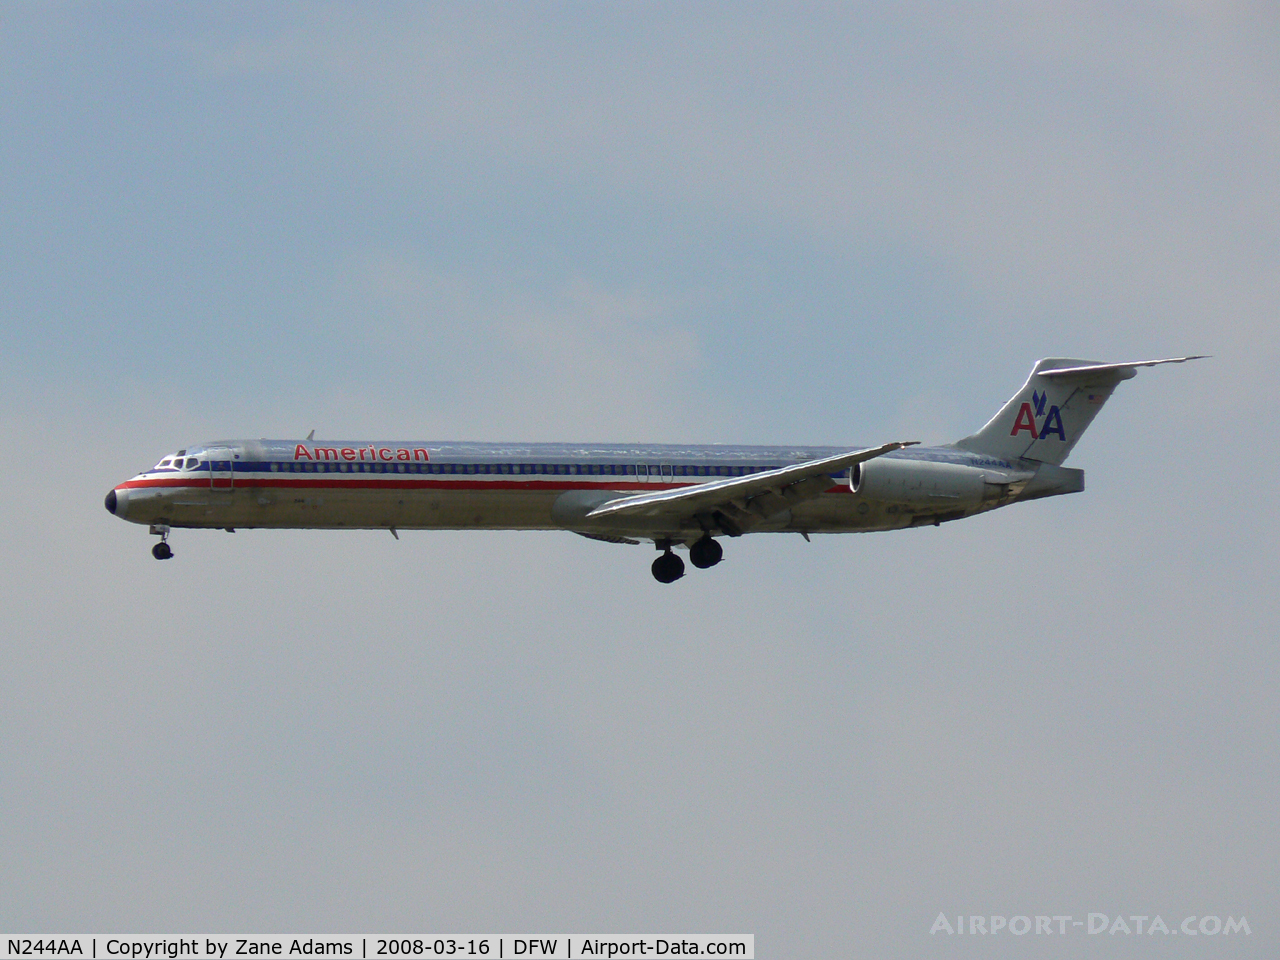 N244AA, 1984 McDonnell Douglas MD-82 (DC-9-82) C/N 49256, American Airlines Landing 18R at DFW